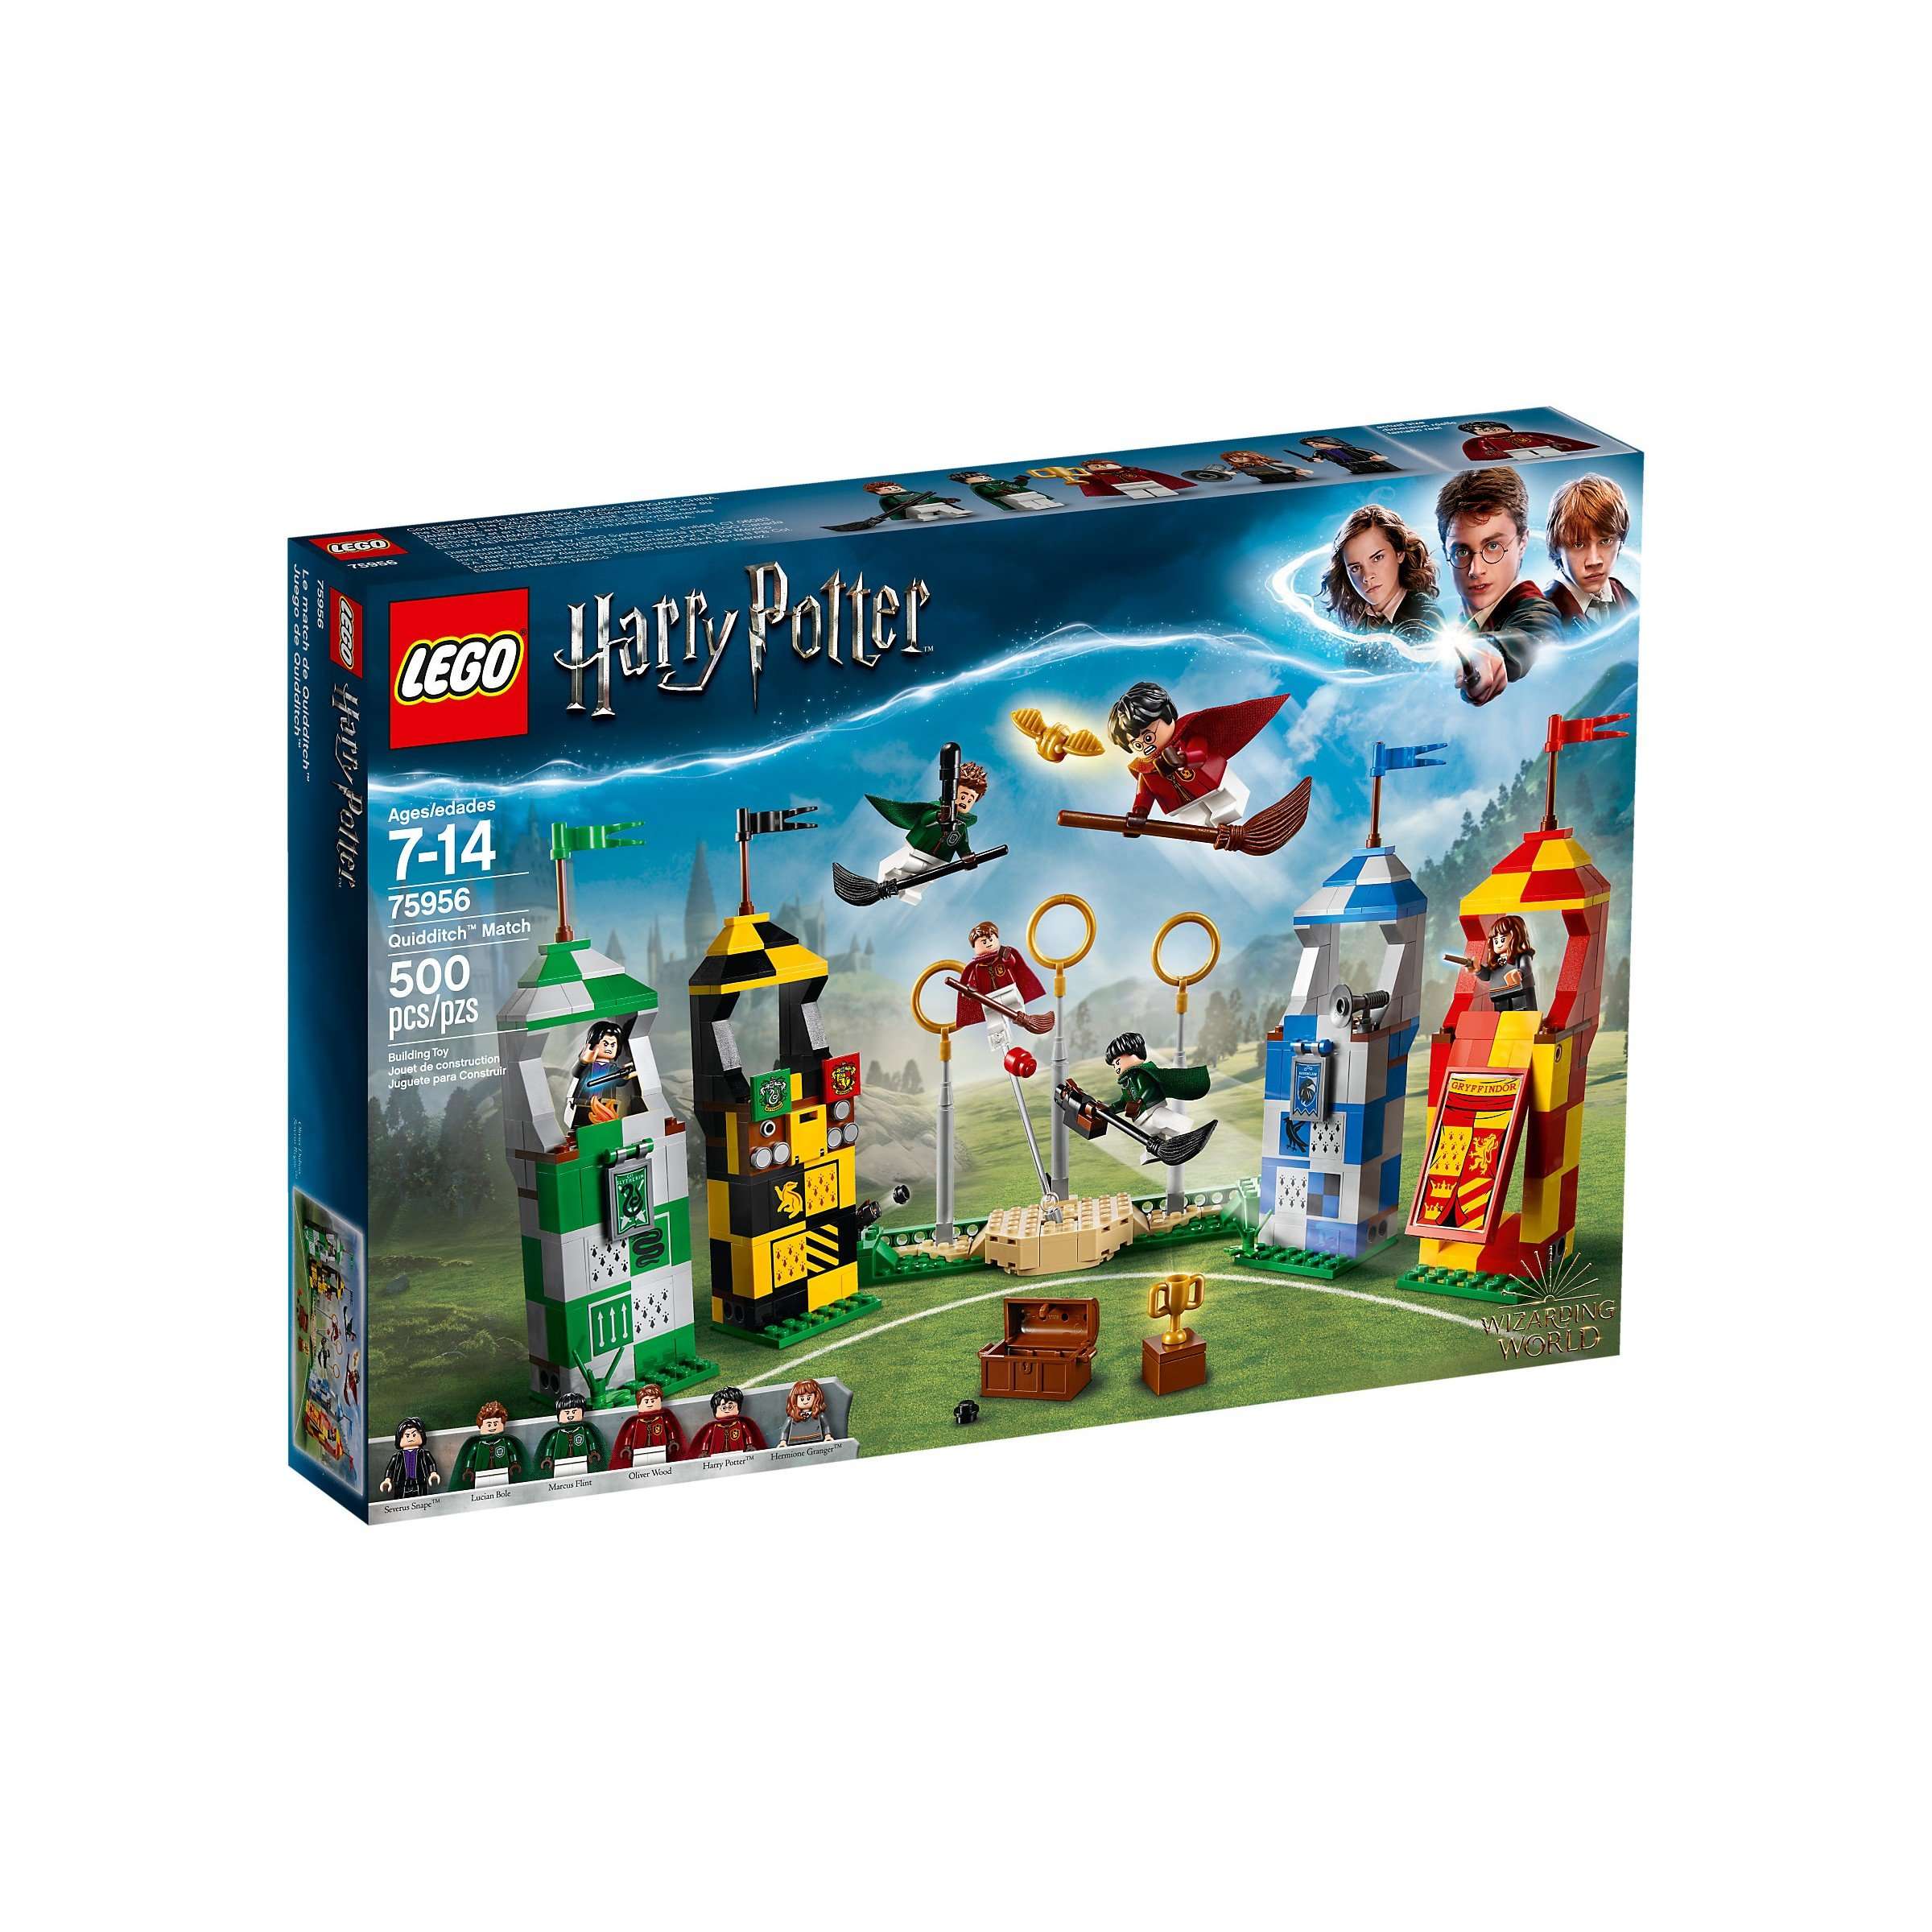 LEGO 75956 Harry Potter Quidditch Match at Toys R Us